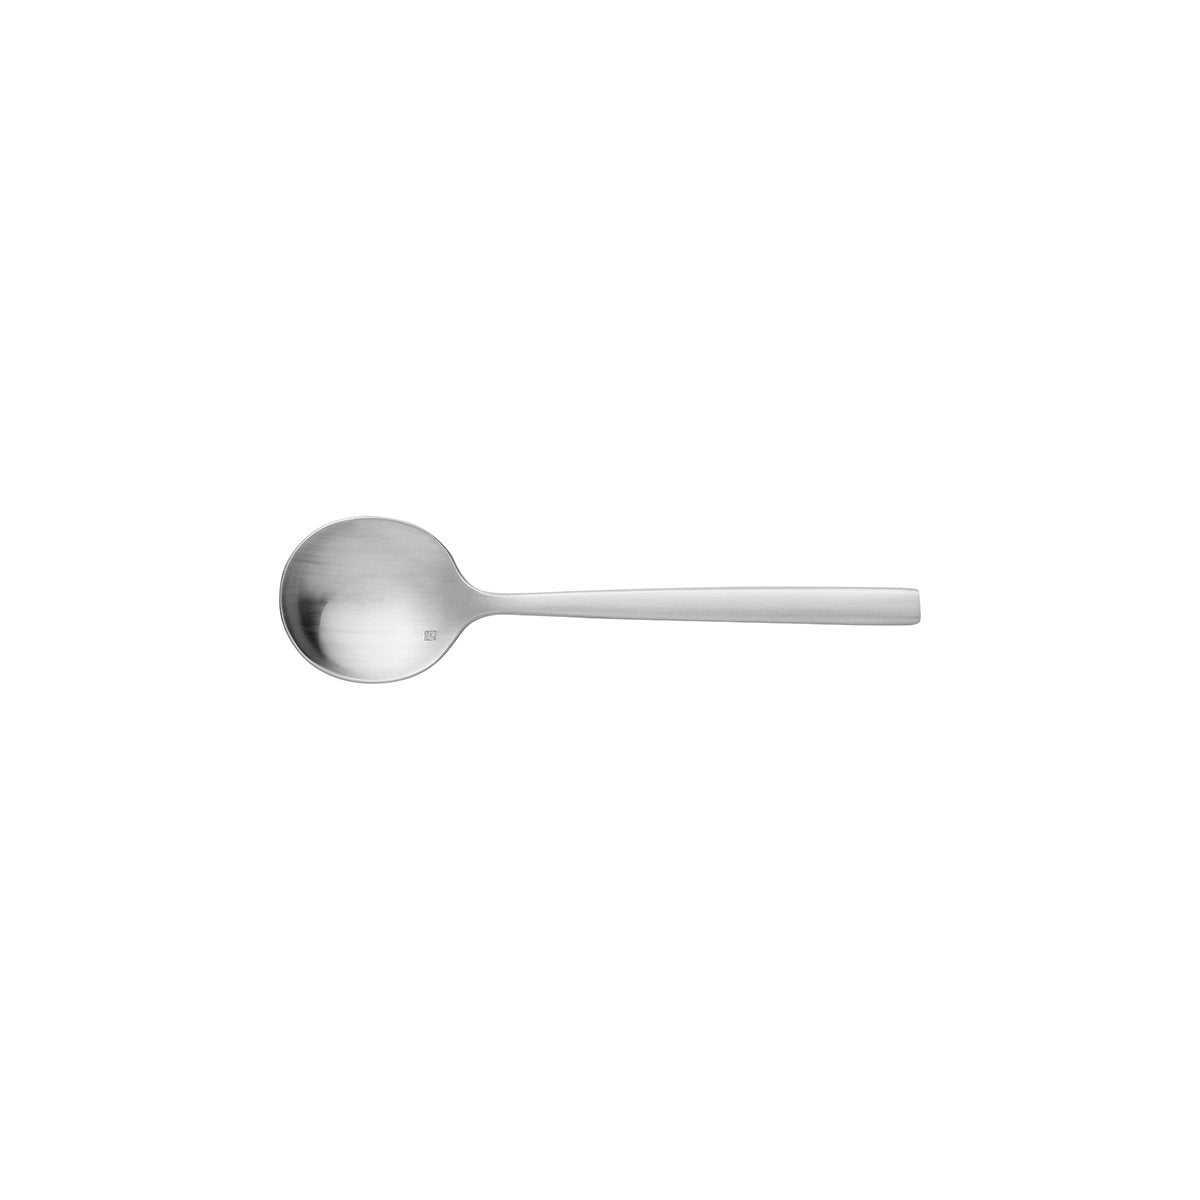 Soup Spoon - Titan Arezzo Brushed from Fortessa. made out of Stainless Steel and sold in boxes of 12. Hospitality quality at wholesale price with The Flying Fork! 